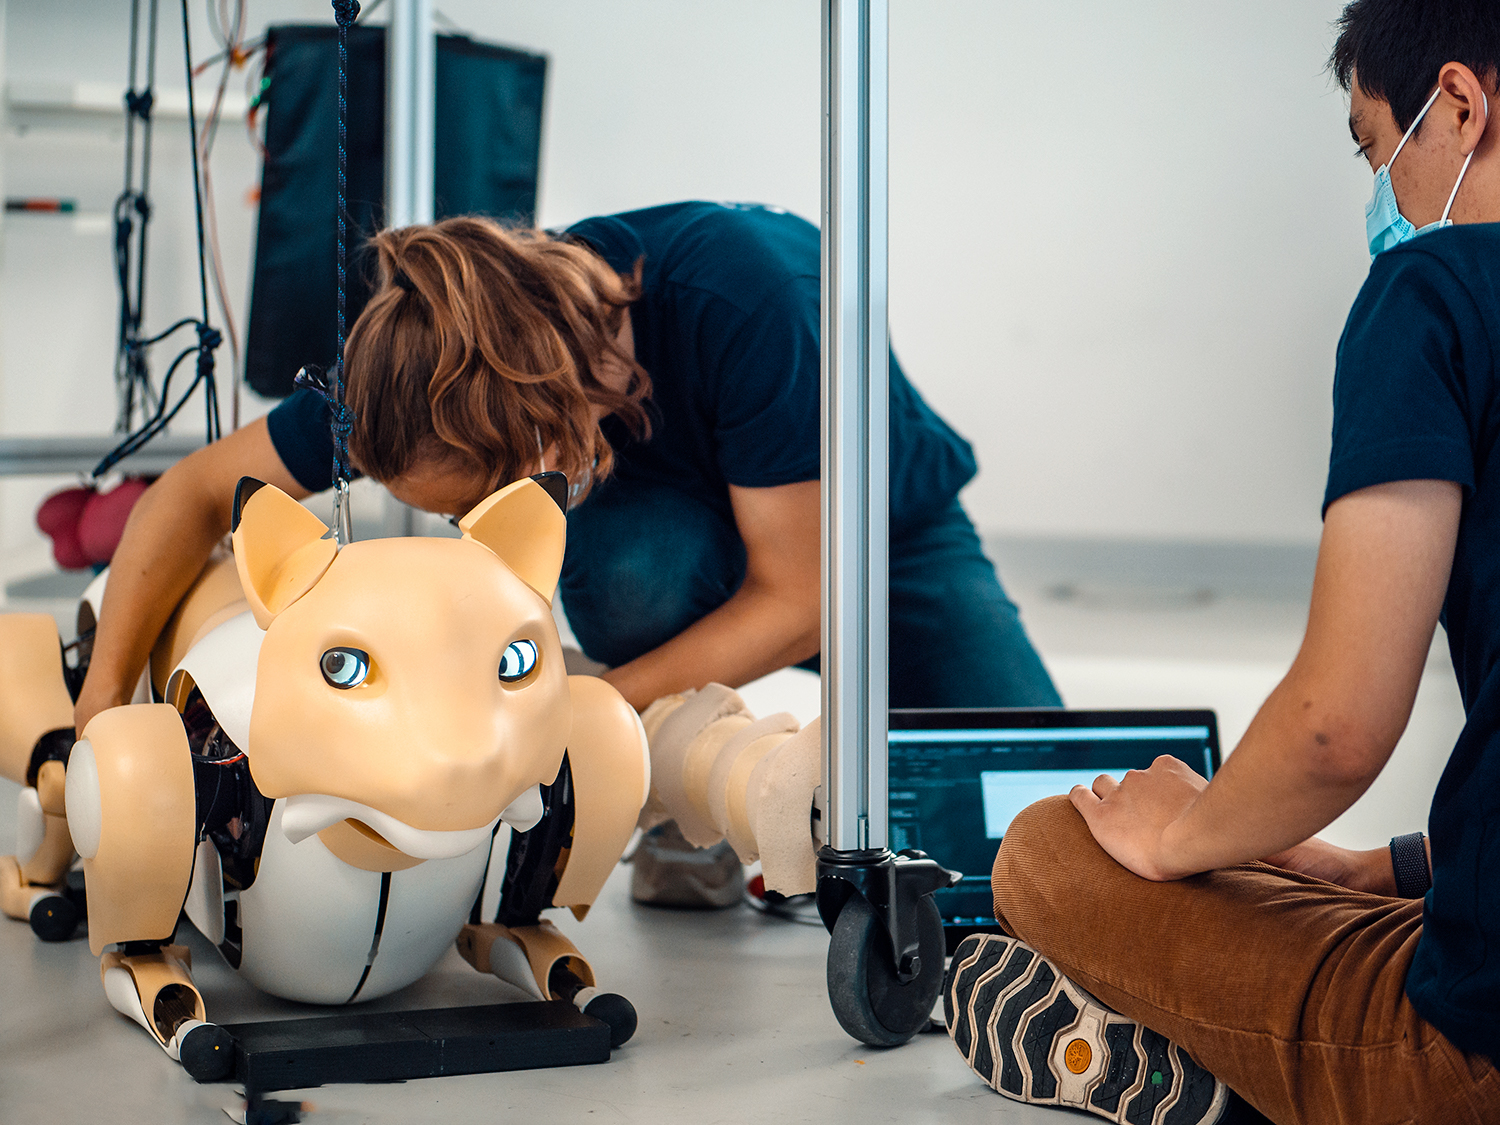 Andrina Grimm and her team are developing a cat-like robot named Dyana.